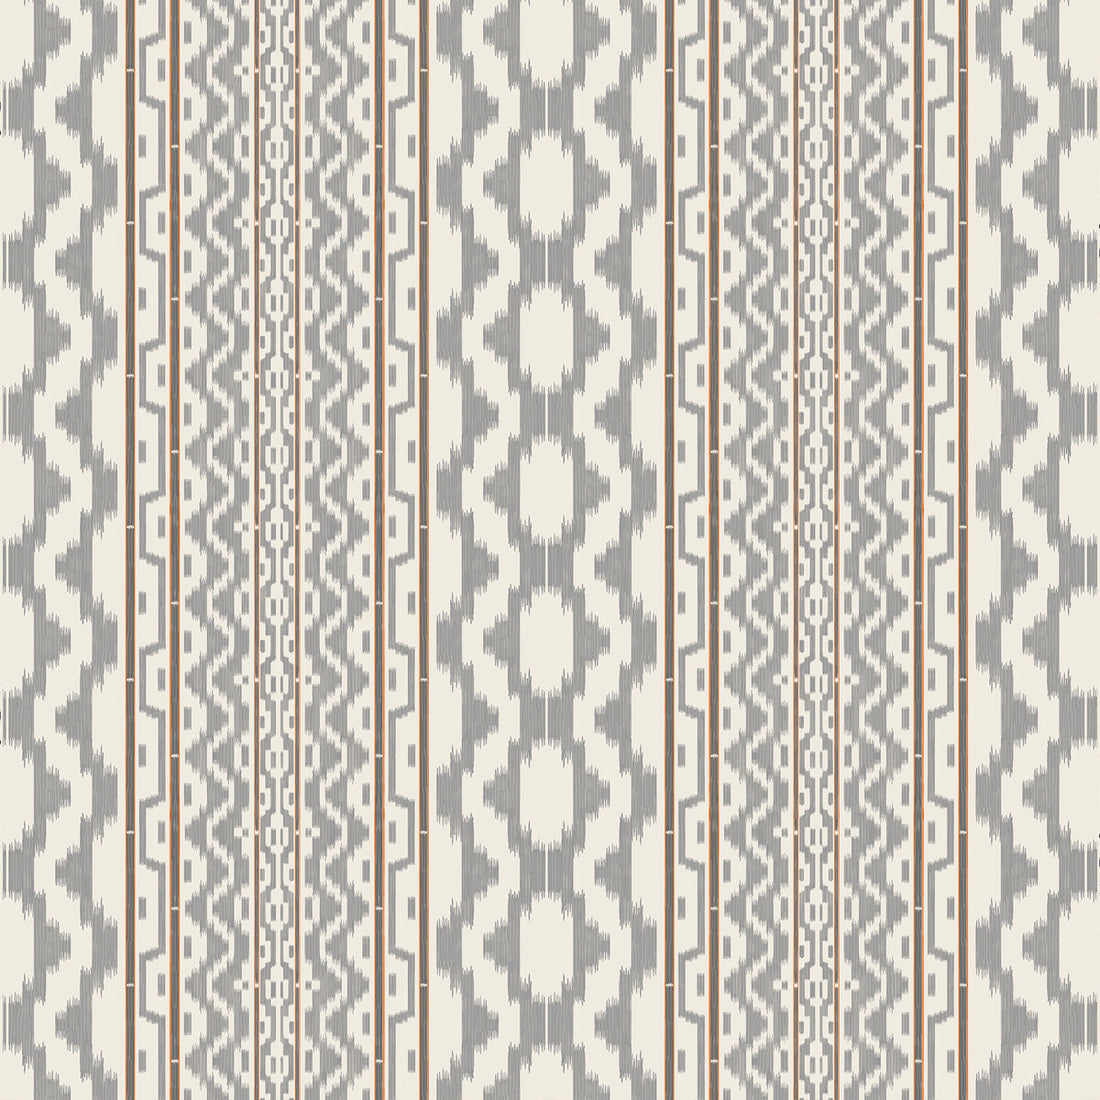 Cala Murada fabric in gris naranja color - pattern GDT5682.002.0 - by Gaston y Daniela in the Gaston Maiorica collection